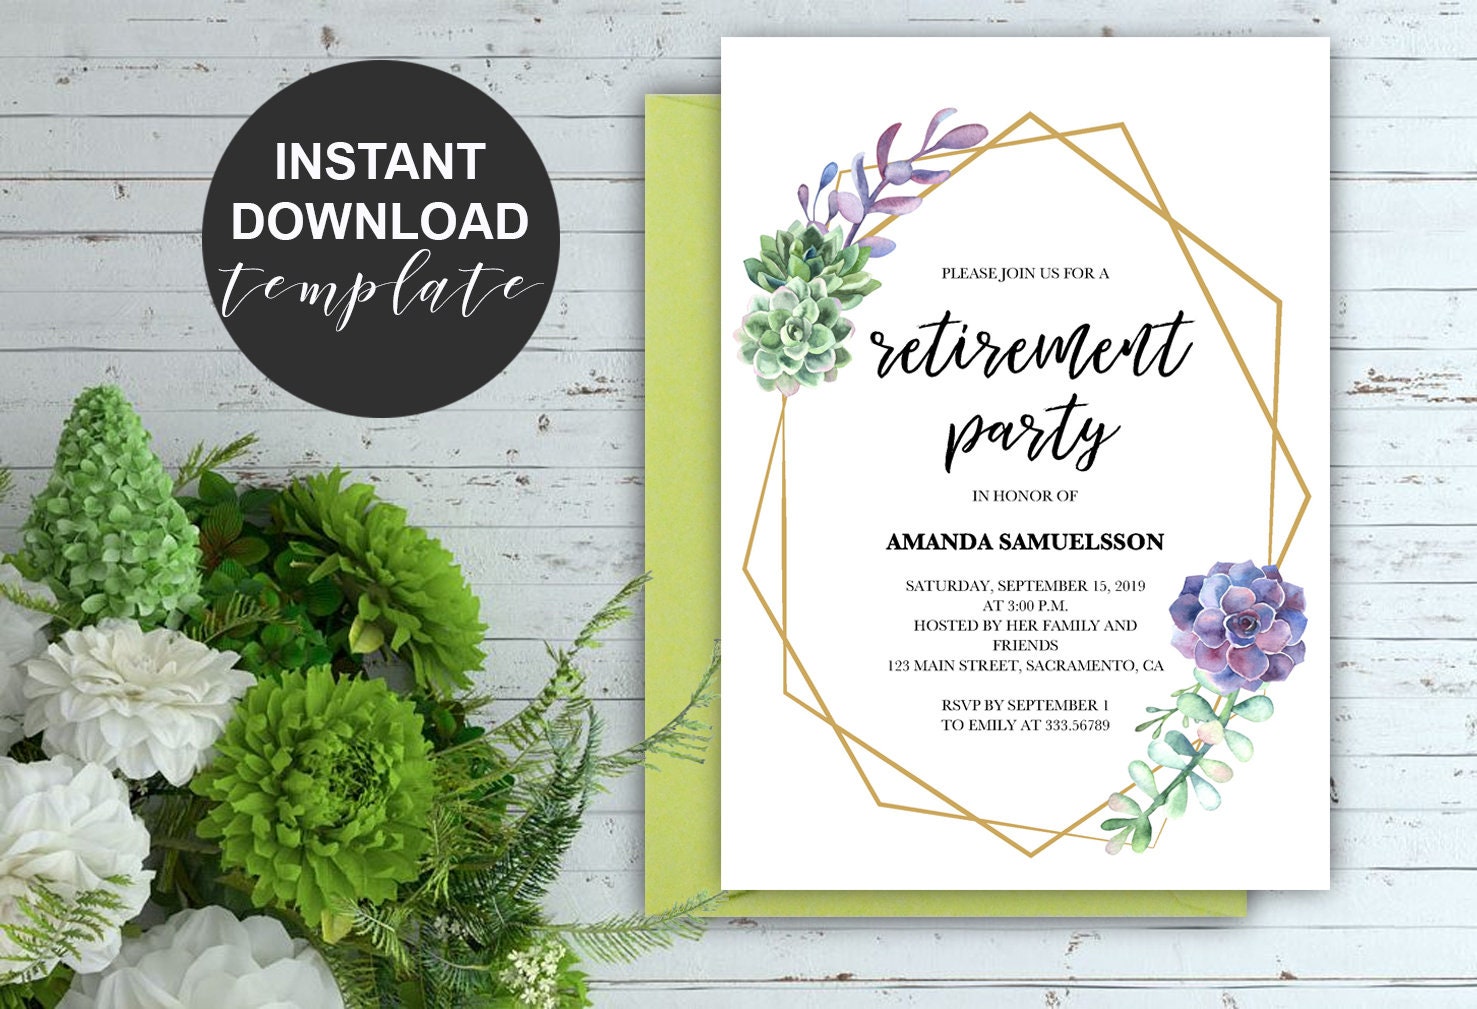 Retirement Party Invite Template from i.etsystatic.com